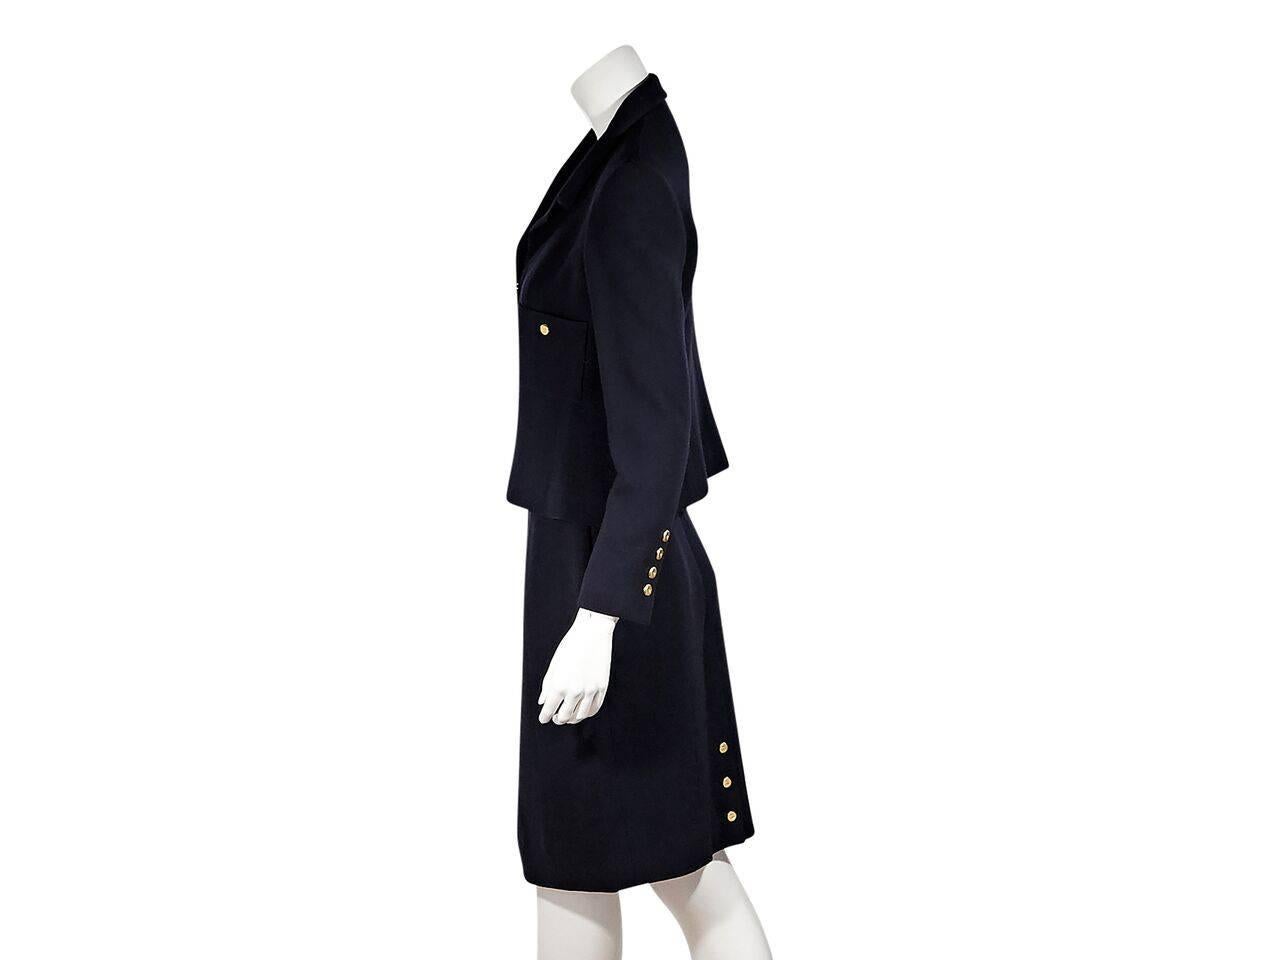 Product details:  Vintage navy blue skirt suit set by Chanel.  Notched lapel.  Bracelet-length sleeves.  Four-button detail at cuffs.  Concealed hook closure.  Chest patch pockets.  Matching pencil skirt.  Banded waist.  Concealed back zip closure. 